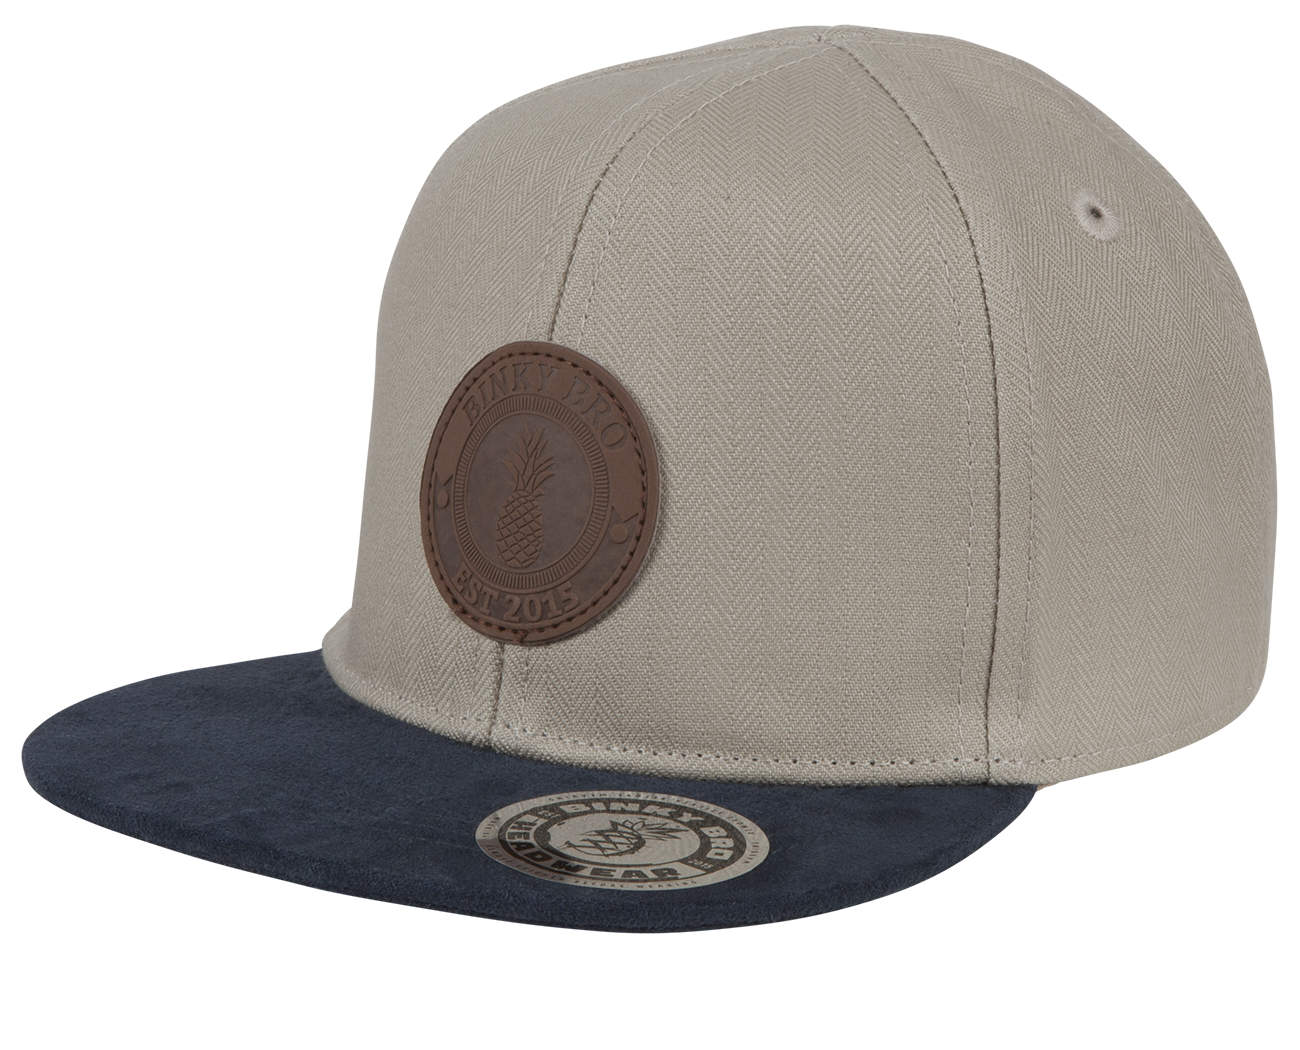 Hamilton Hat: Youth (3 years - 6 years) / Beige / Standard Fit